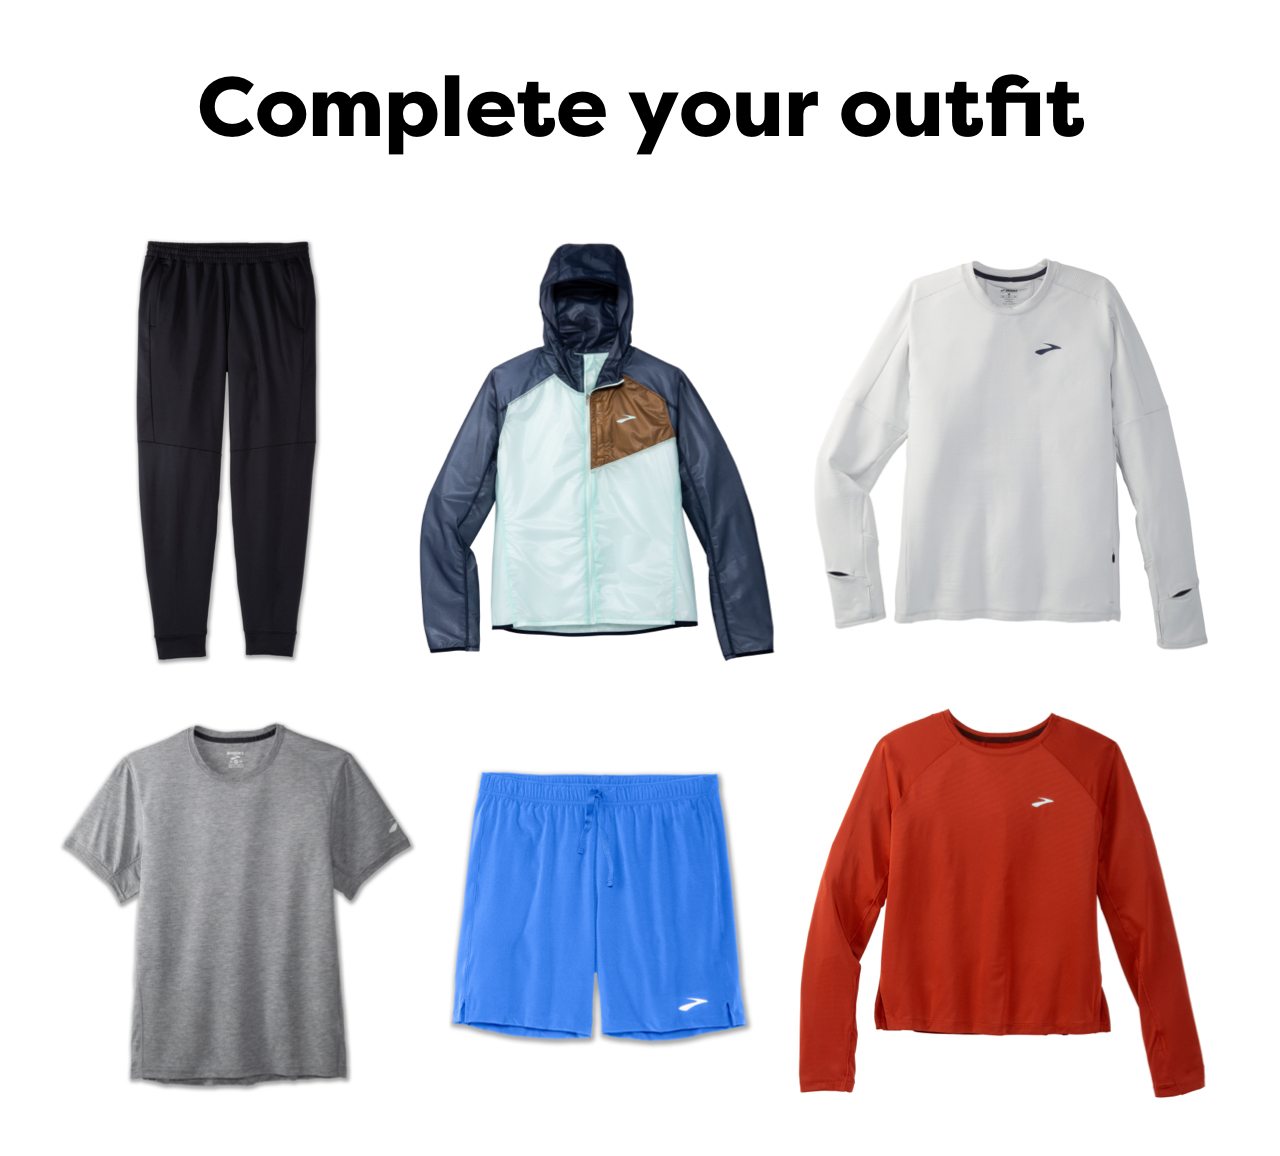 Complete your outfit